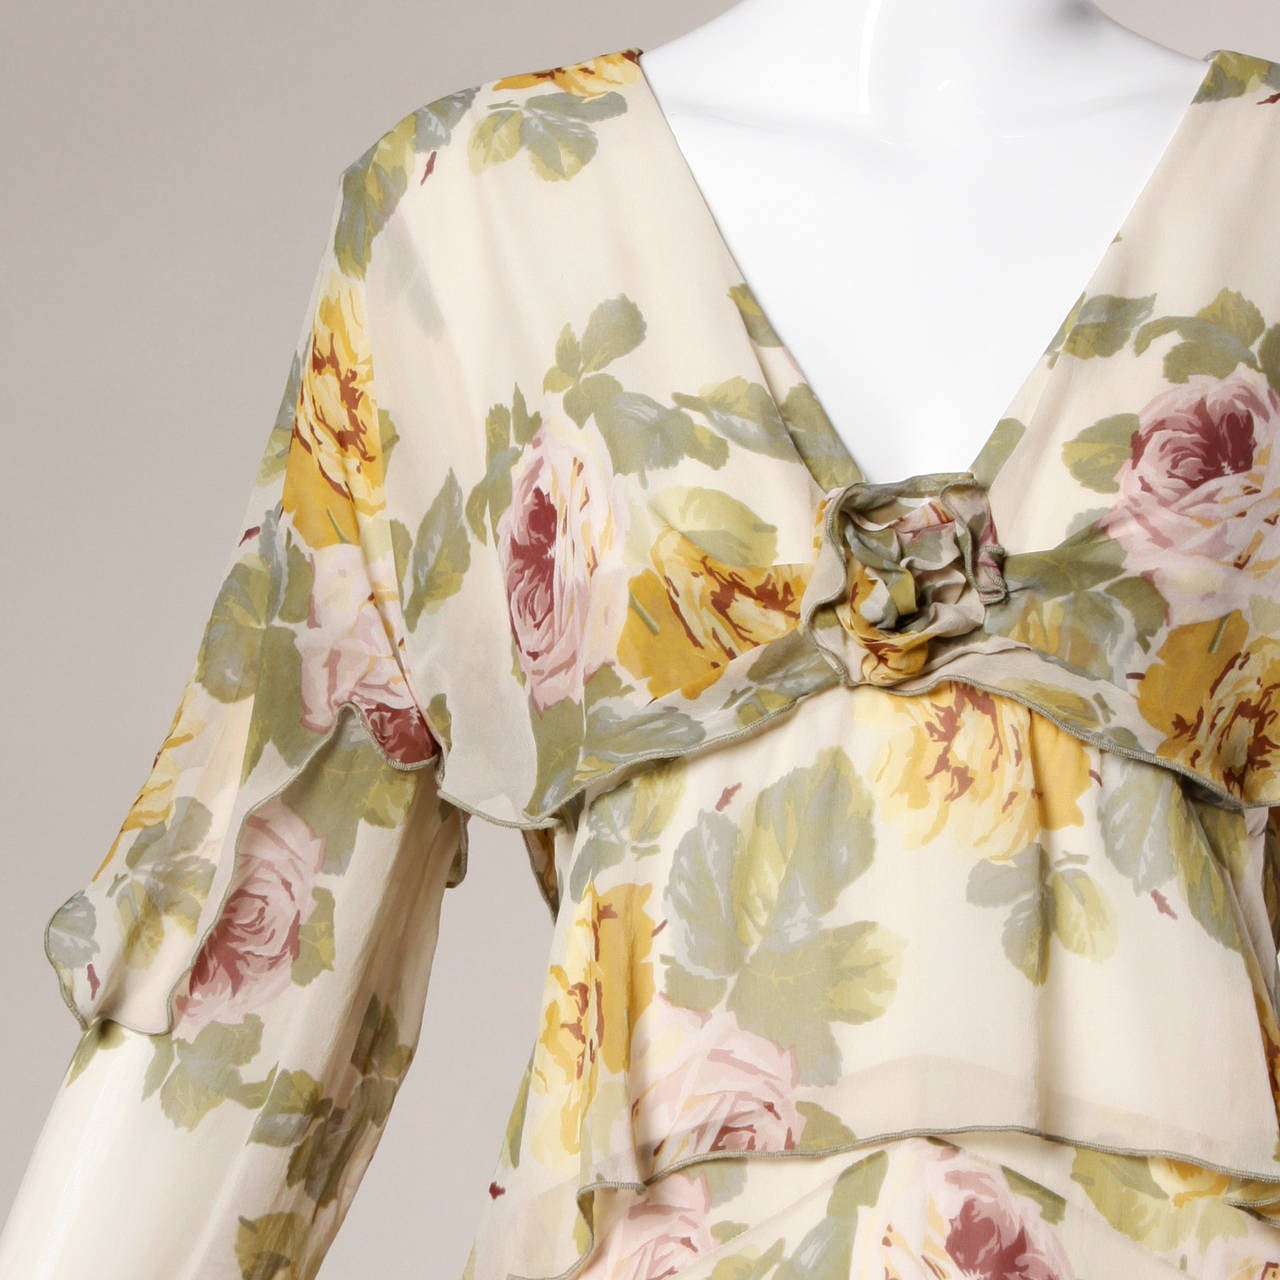 Beautiful floral printed silk tiered dress by Holly's Harp. Light weight delicate chiffon fabric.

Details:

Fully Lined
No Closure/ Fabric Contains Stretch
Marked Size: L
Estimated Size: L
Color: Ivory/ Yellow Ochre/ Shades of Green/